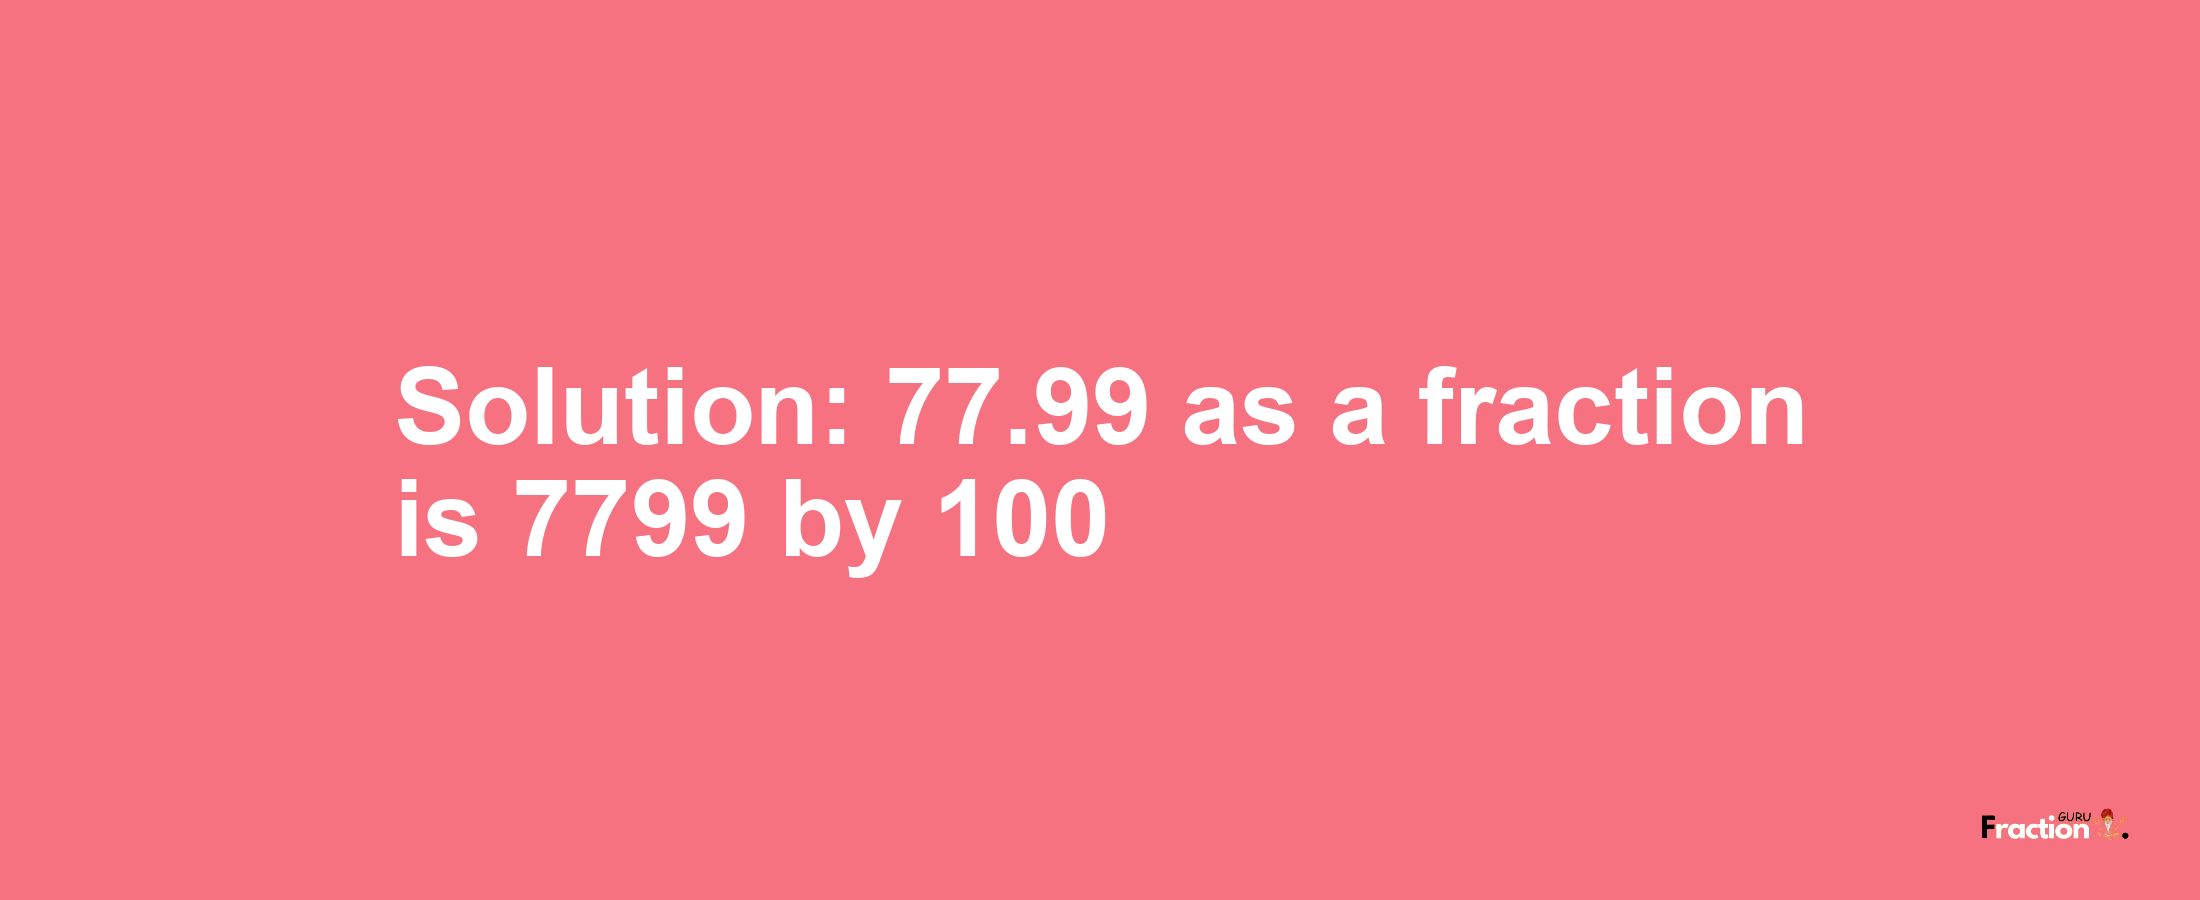 Solution:77.99 as a fraction is 7799/100